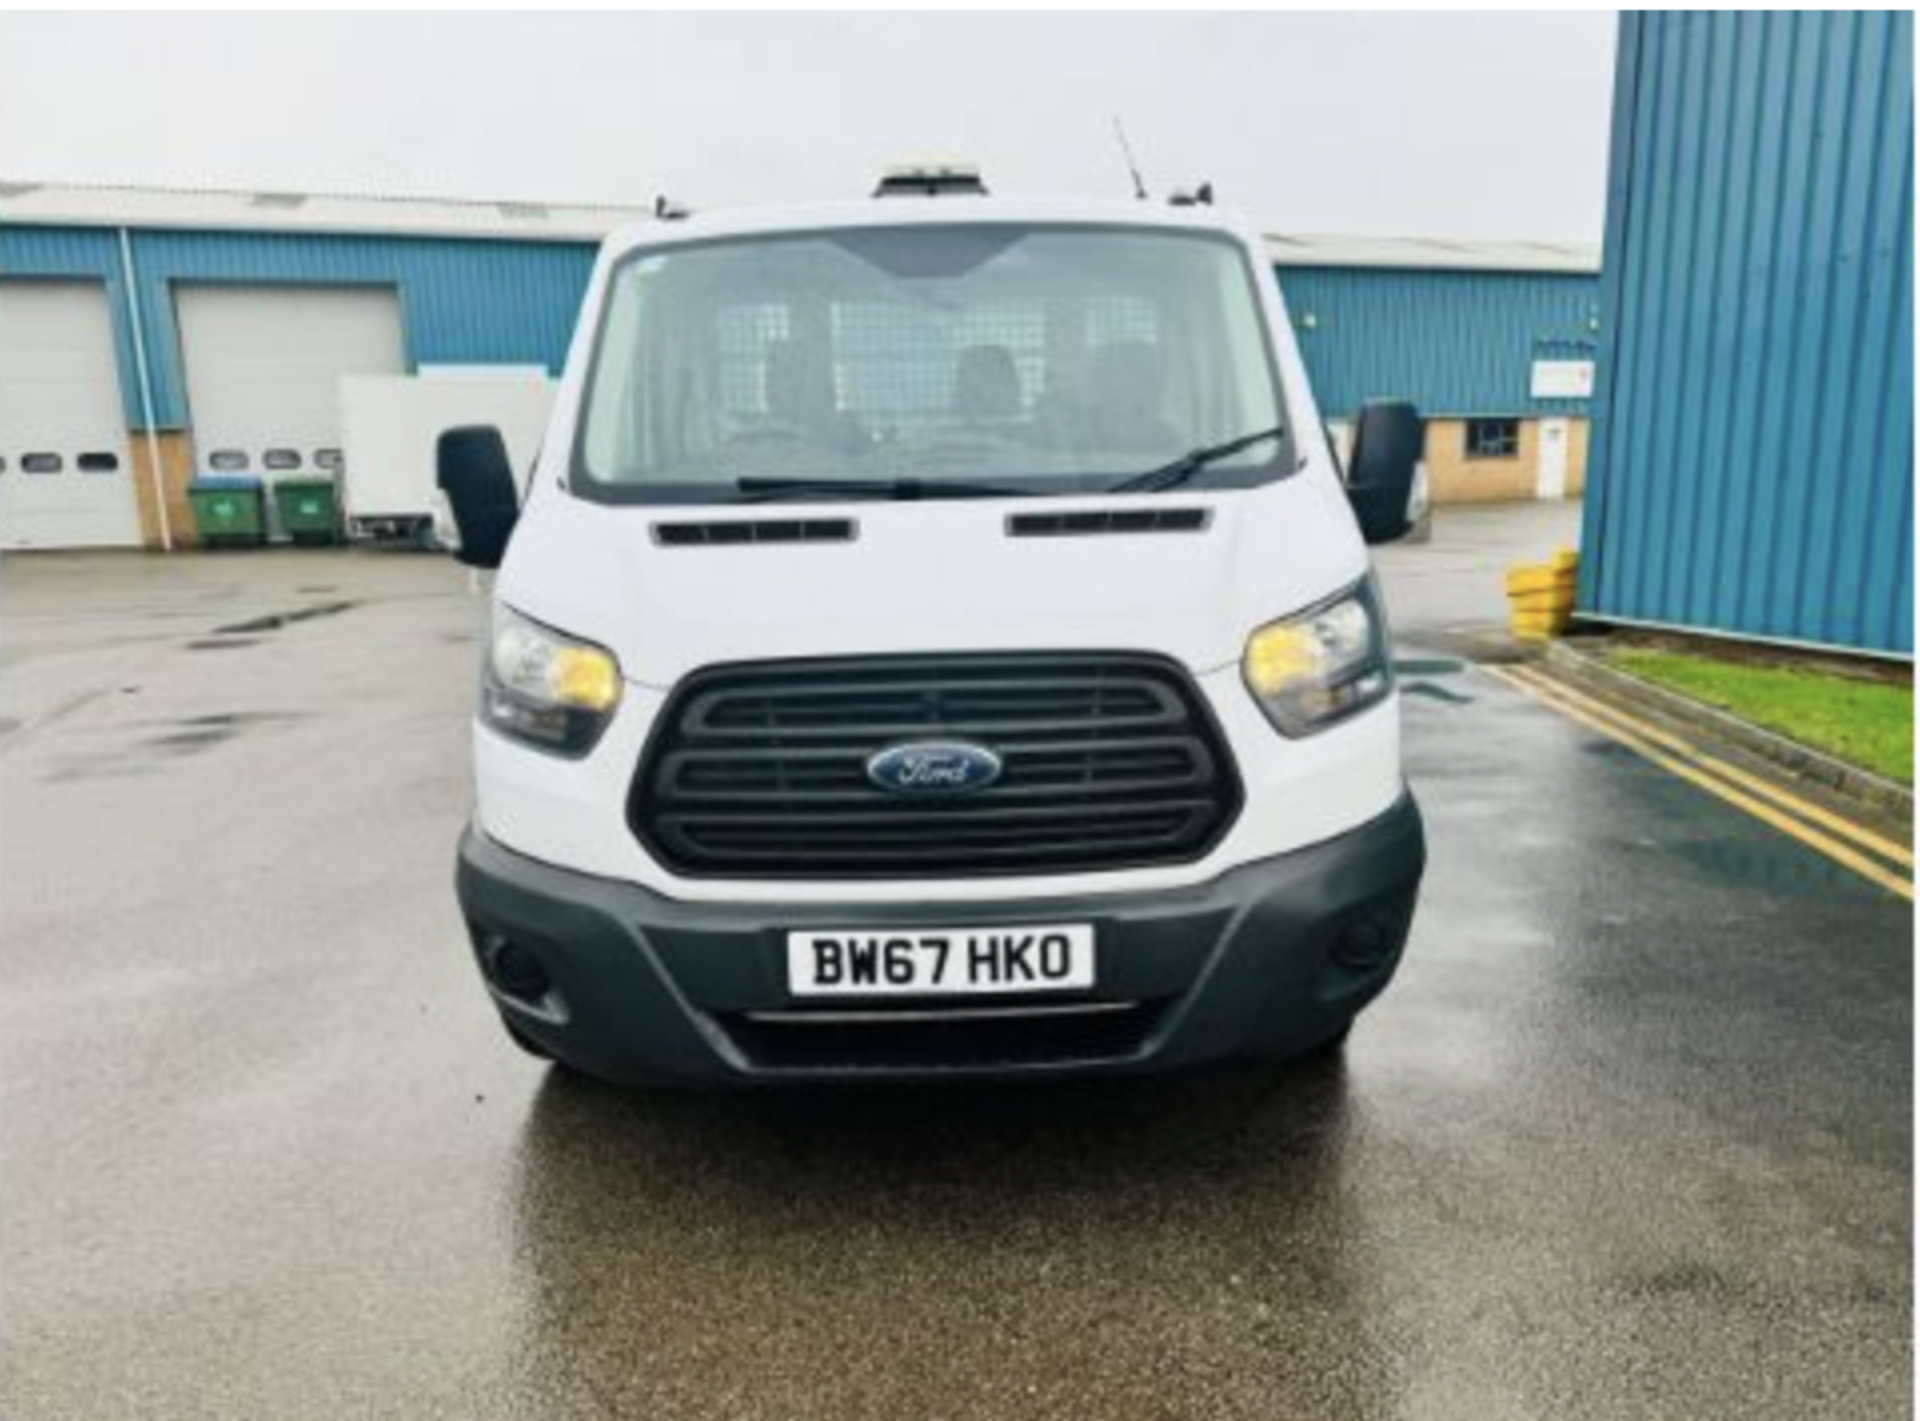 FORD TRANSIT 2.0 TIPPER130ps 'One Stop' Tipper - Manual - Diesel - 2.0 - Tipper Body 94.6k miles - Image 6 of 11